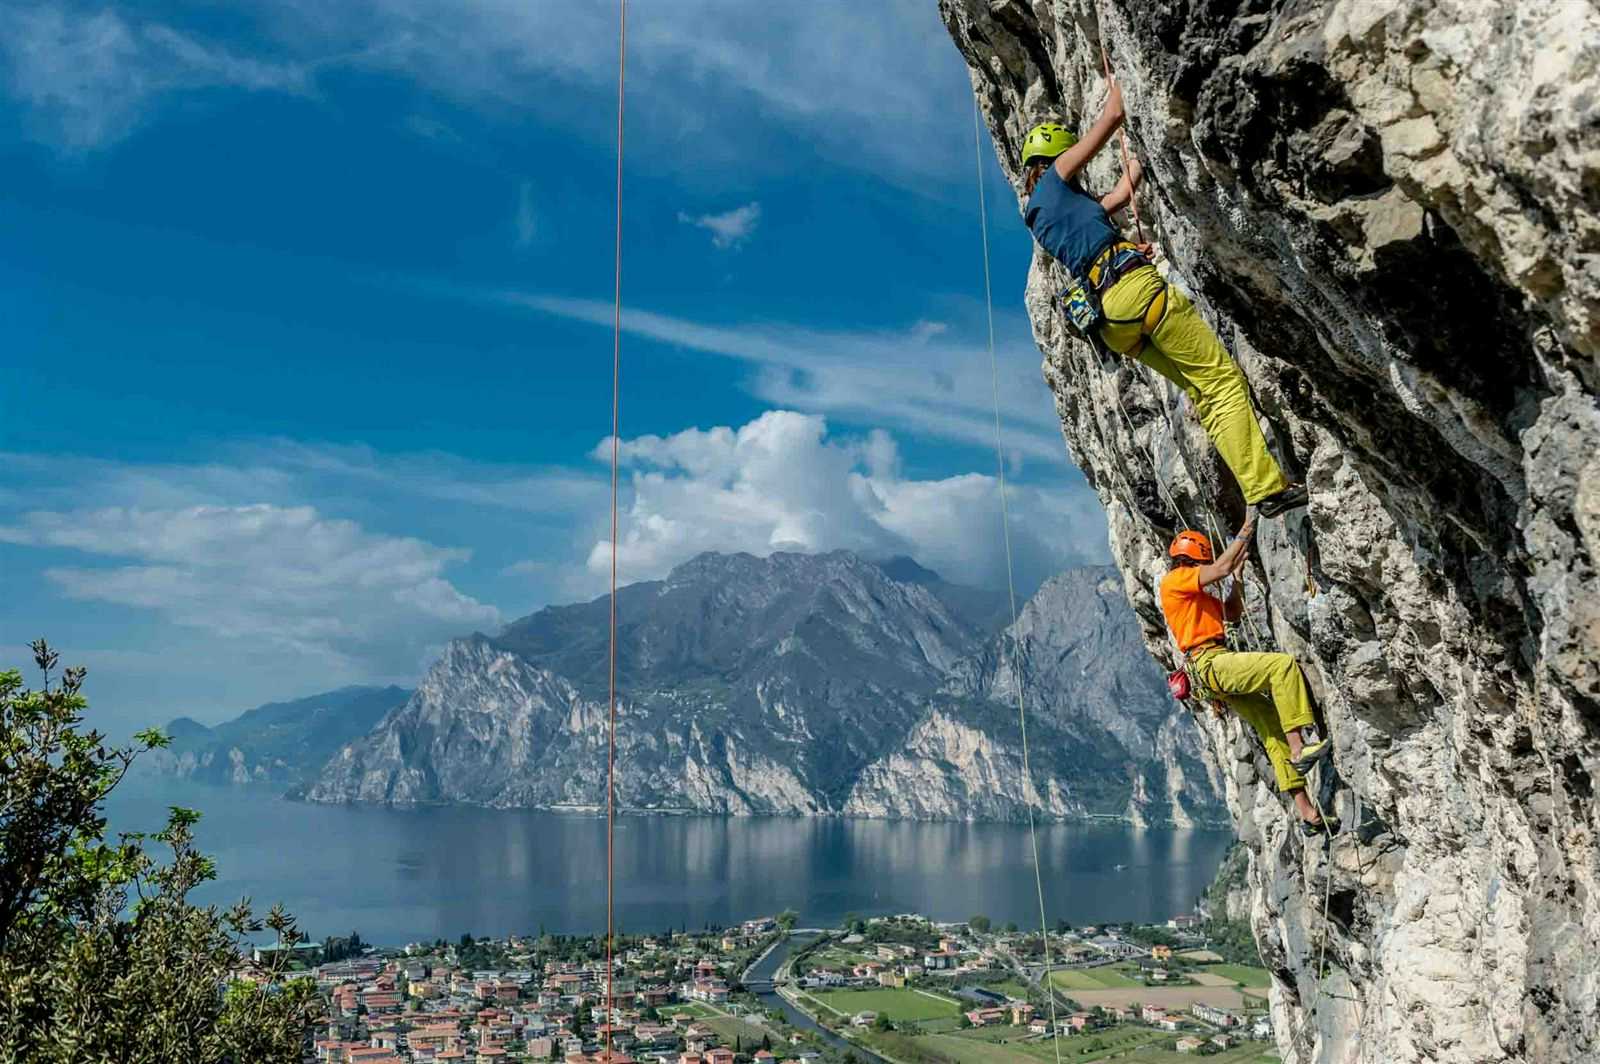 Rock climbing in Arco: What are the Best Spots?